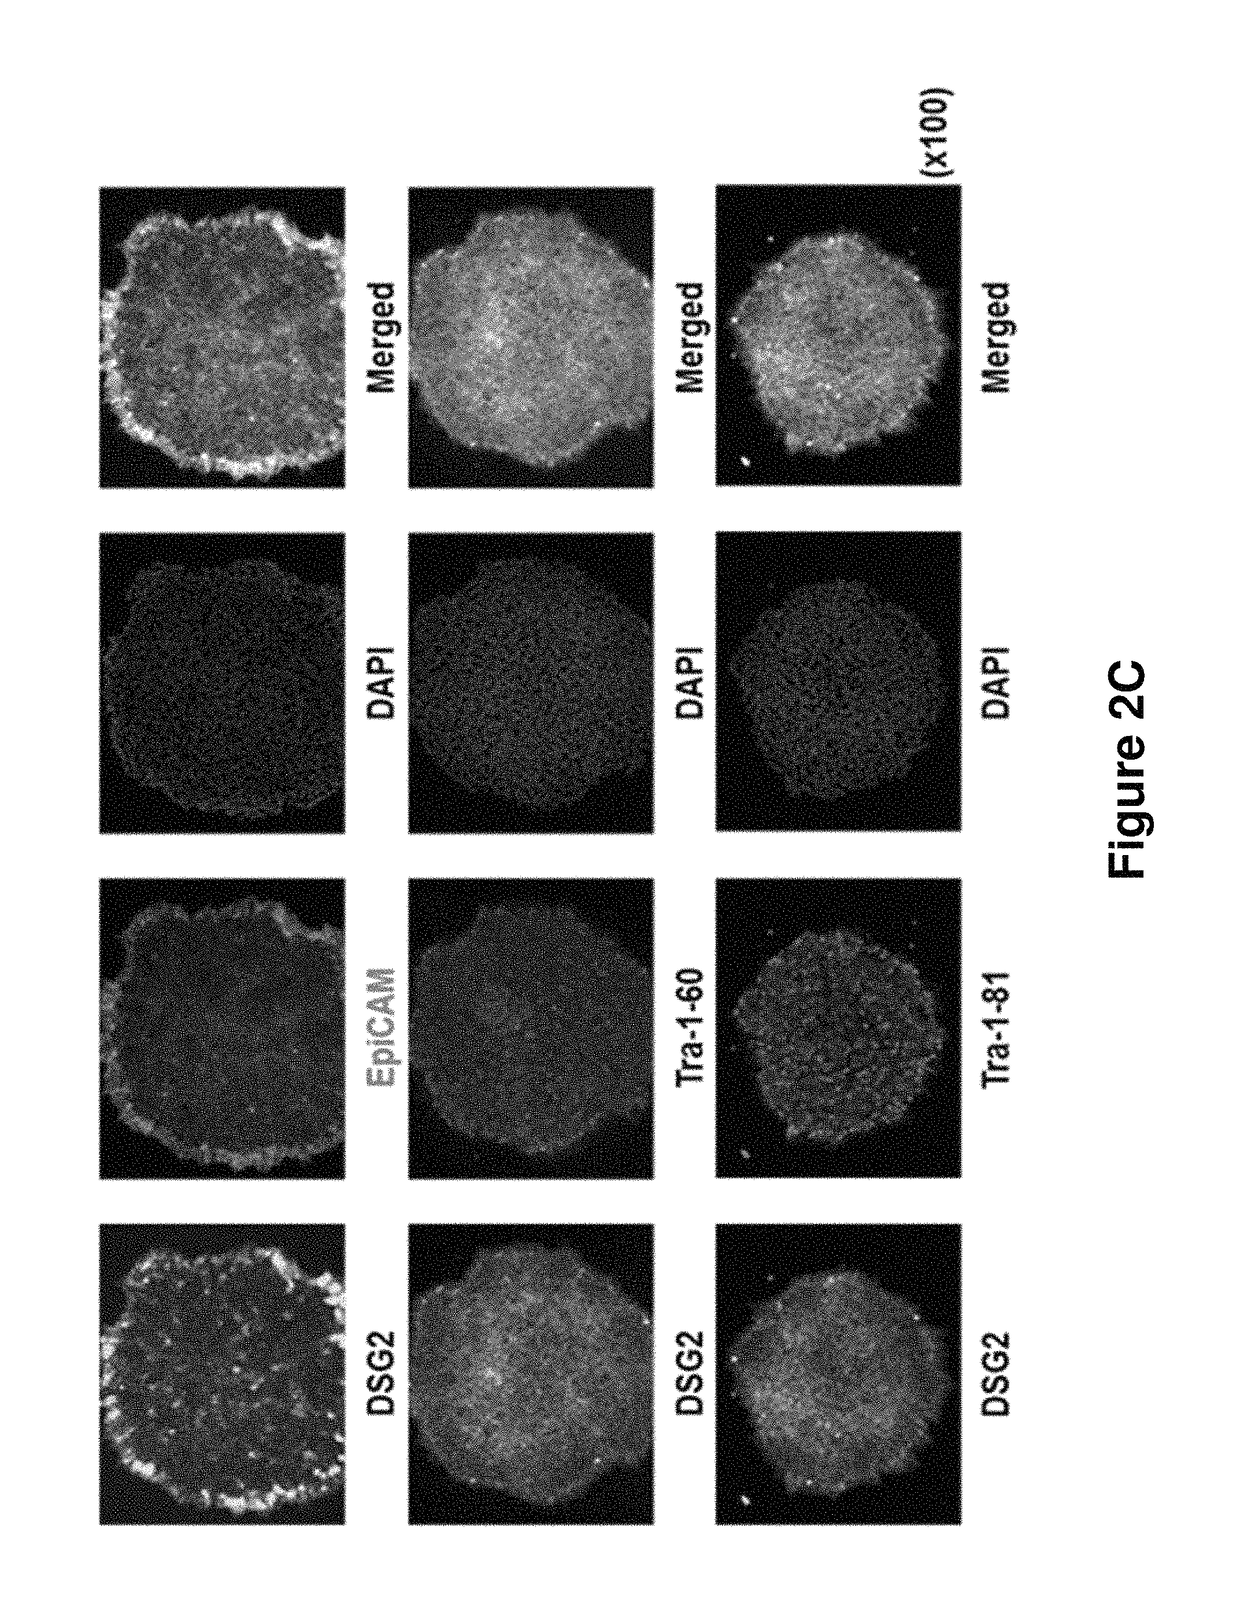 Composition for detecting undifferentiated human pluripotent stem cell, monoclonal antibody 6-1 and use thereof